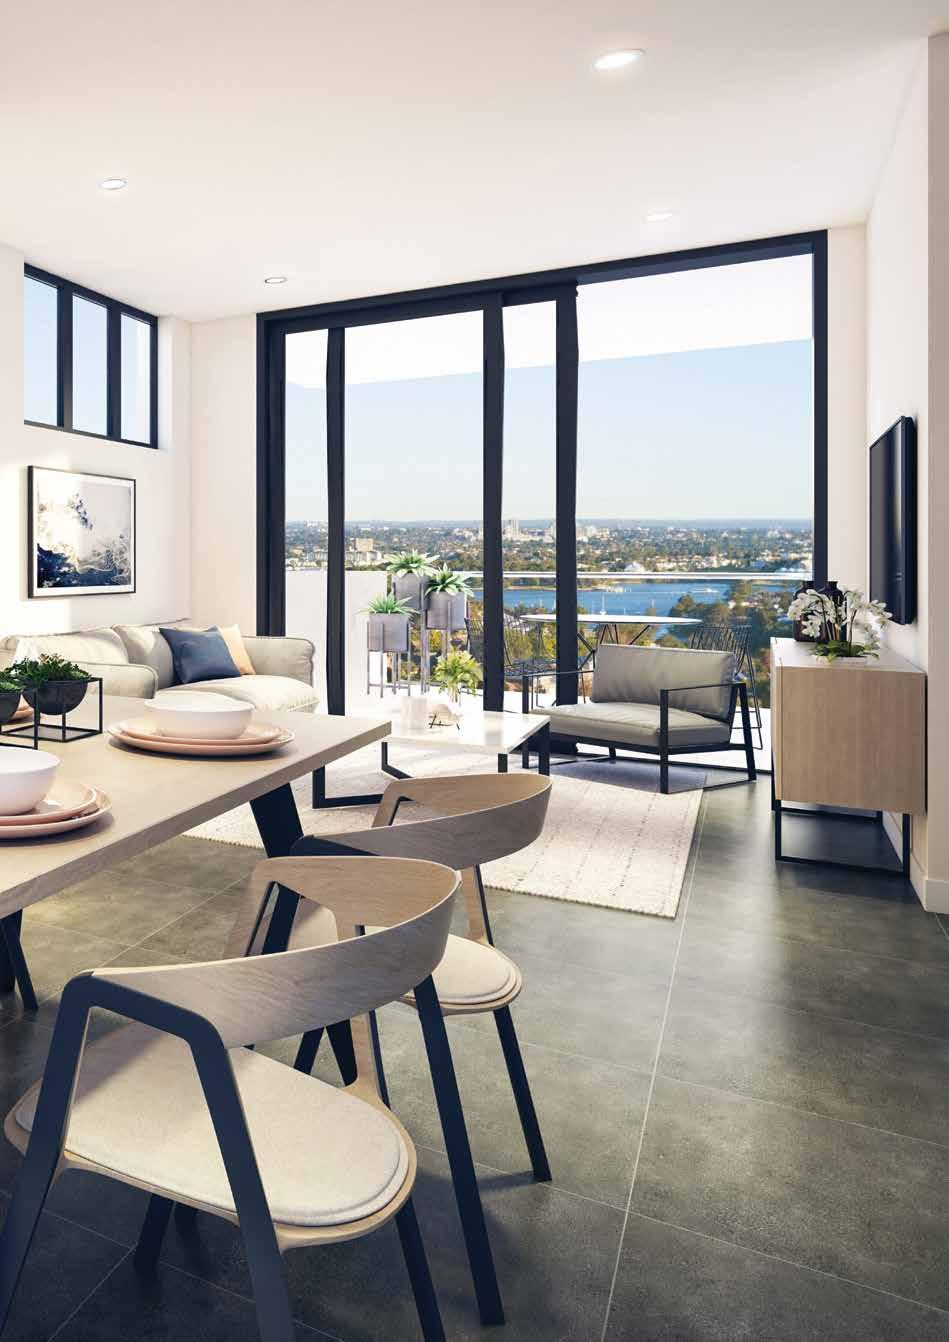 An elevated lifestyle Designed by an award-winning architect, Fox Johnston, Breeze represents a new benchmark in aesthetic appeal and spatial efficiency.